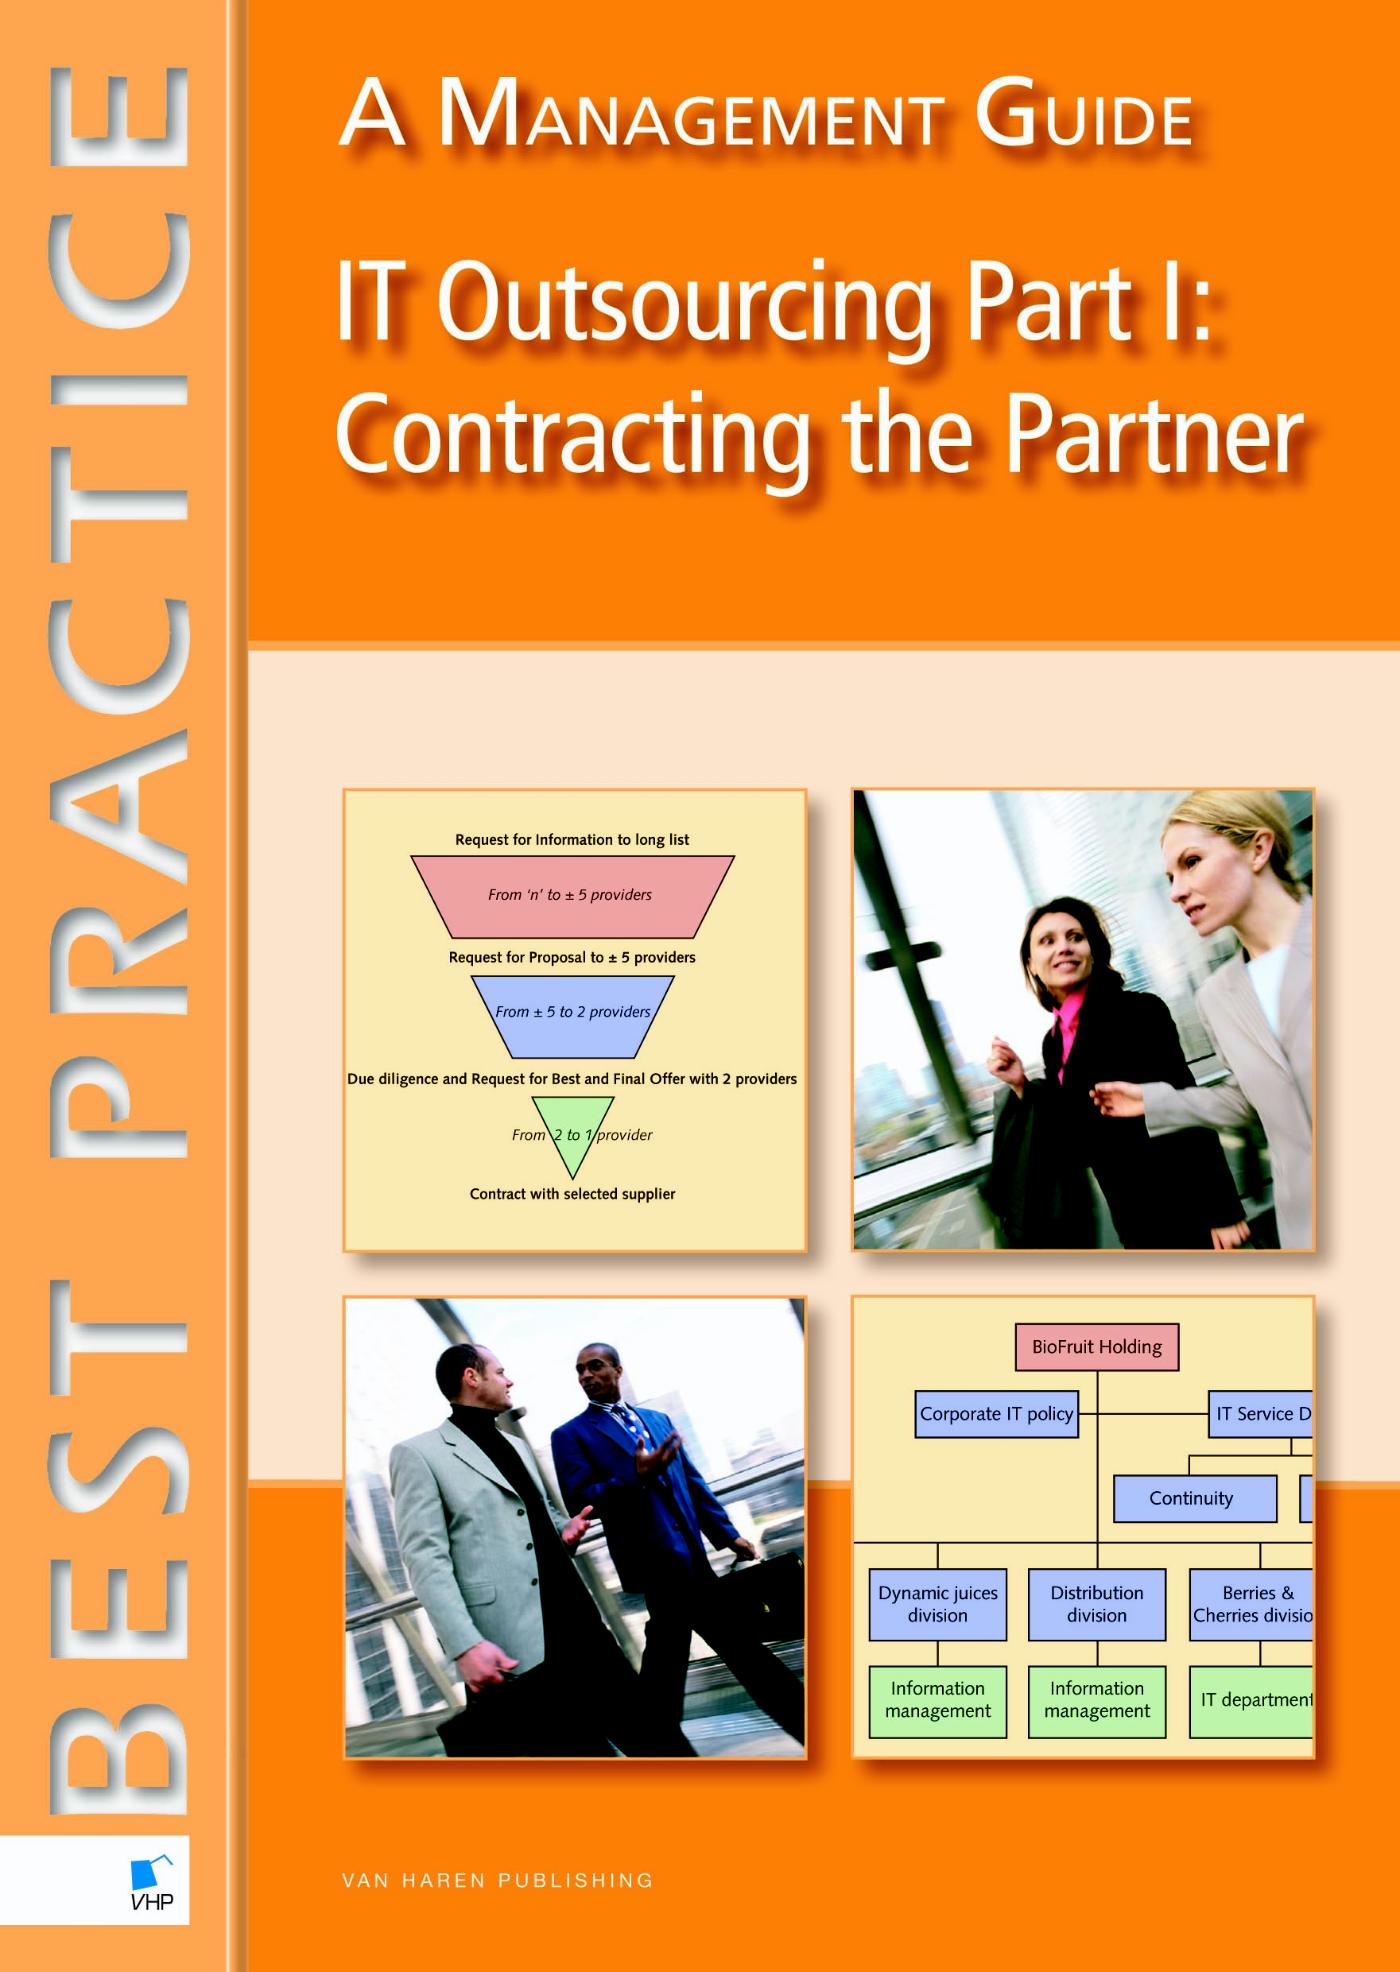 IT Outsourcing / 1 Contracting the Partner / deel a management guide (Ebook)